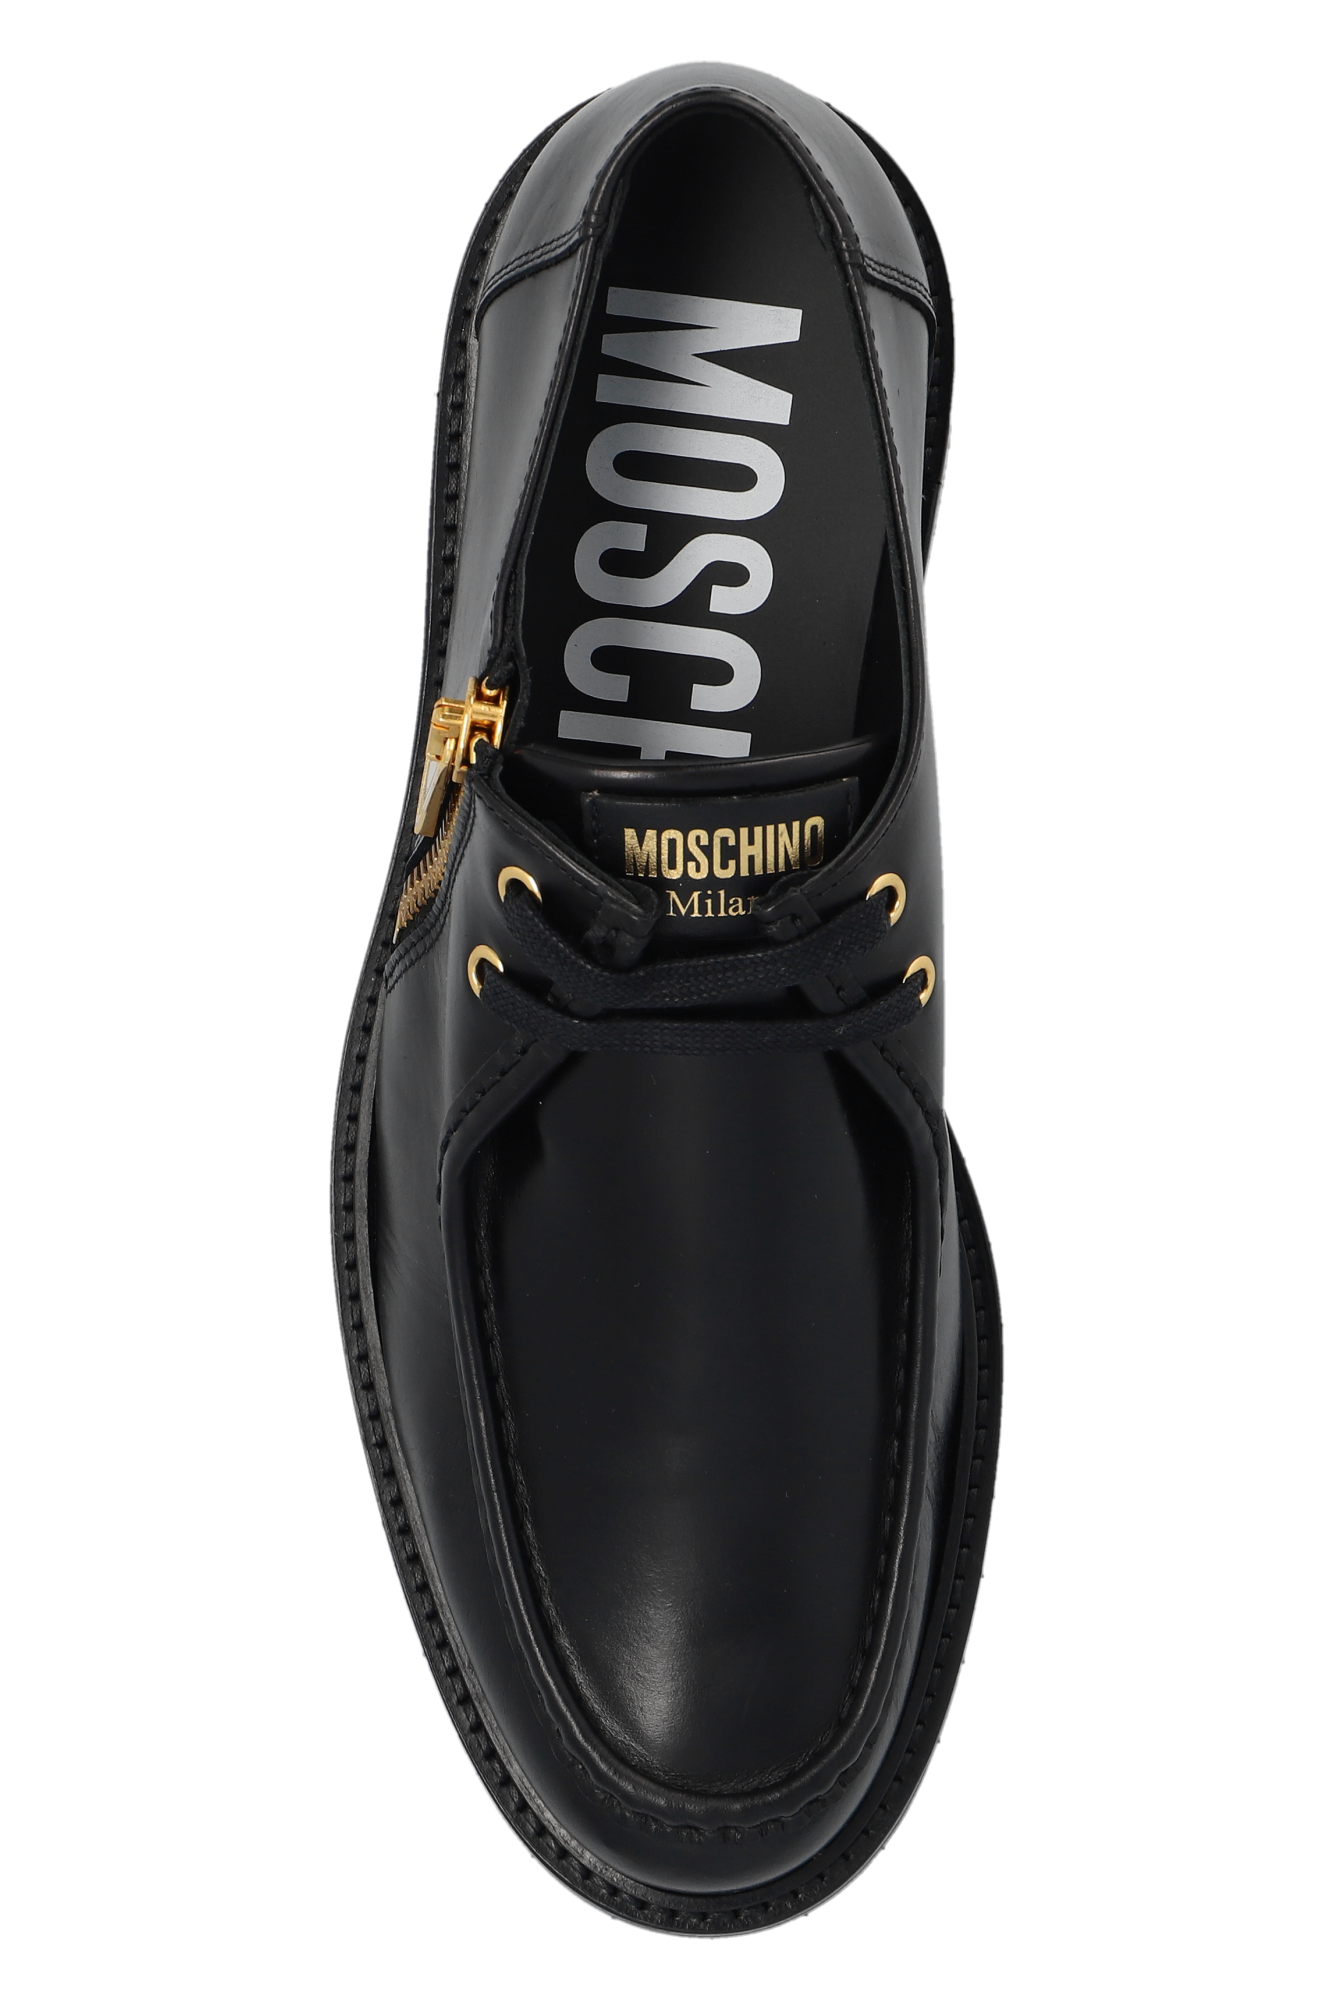 Moschino Leather shoes